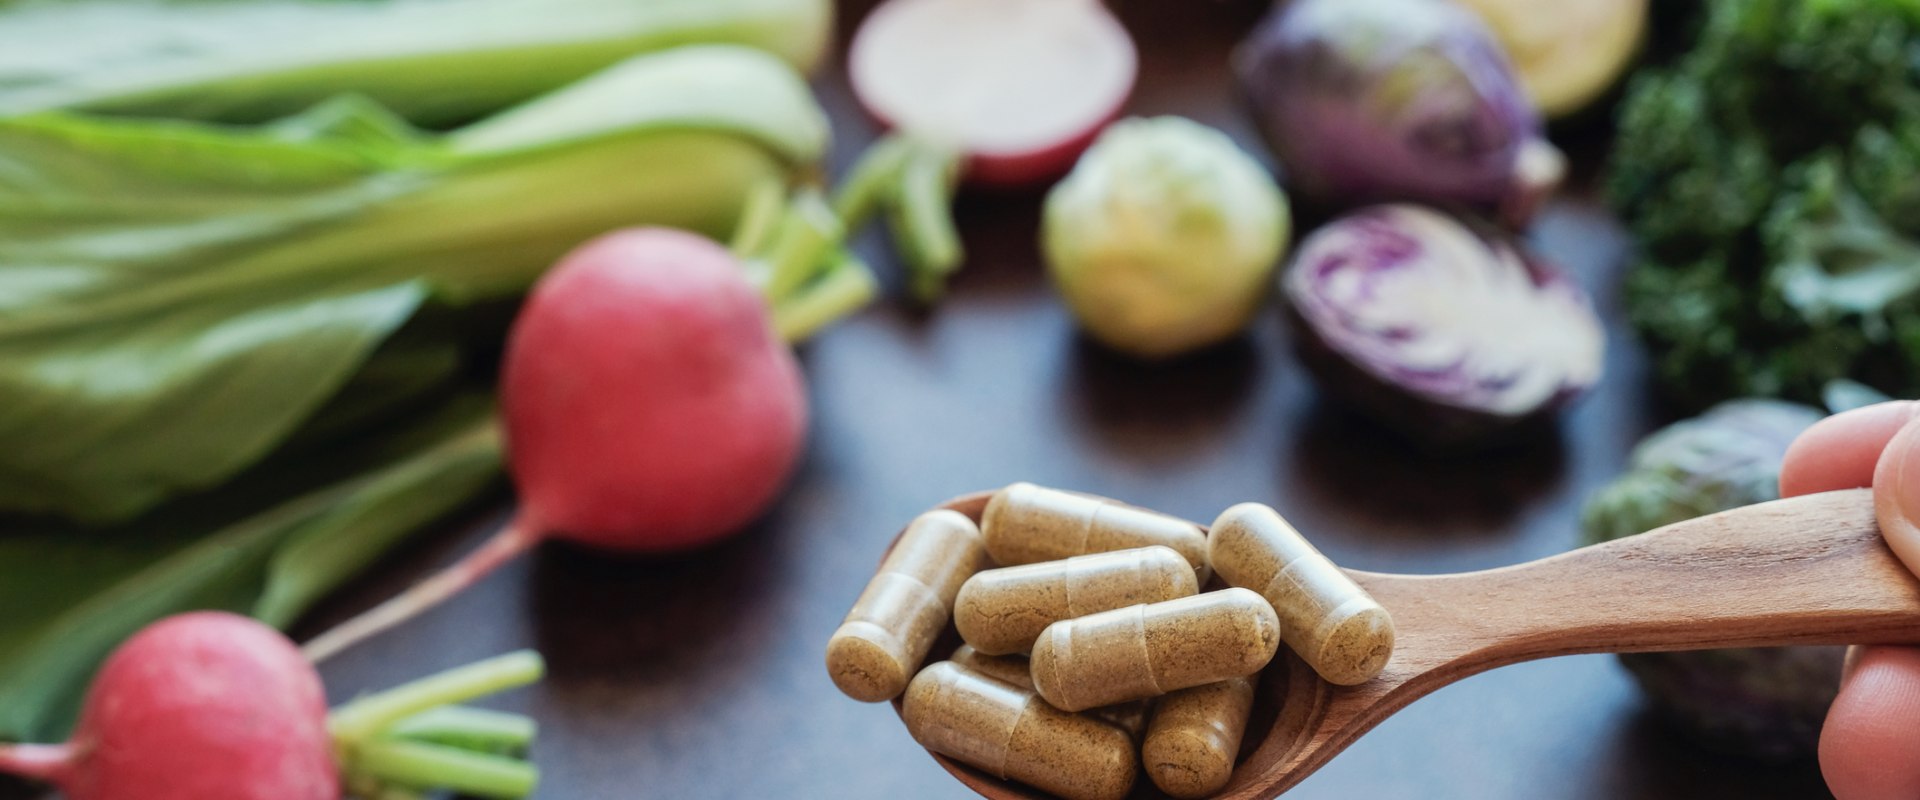 Are Health Supplements Beneficial for Everyday Use?